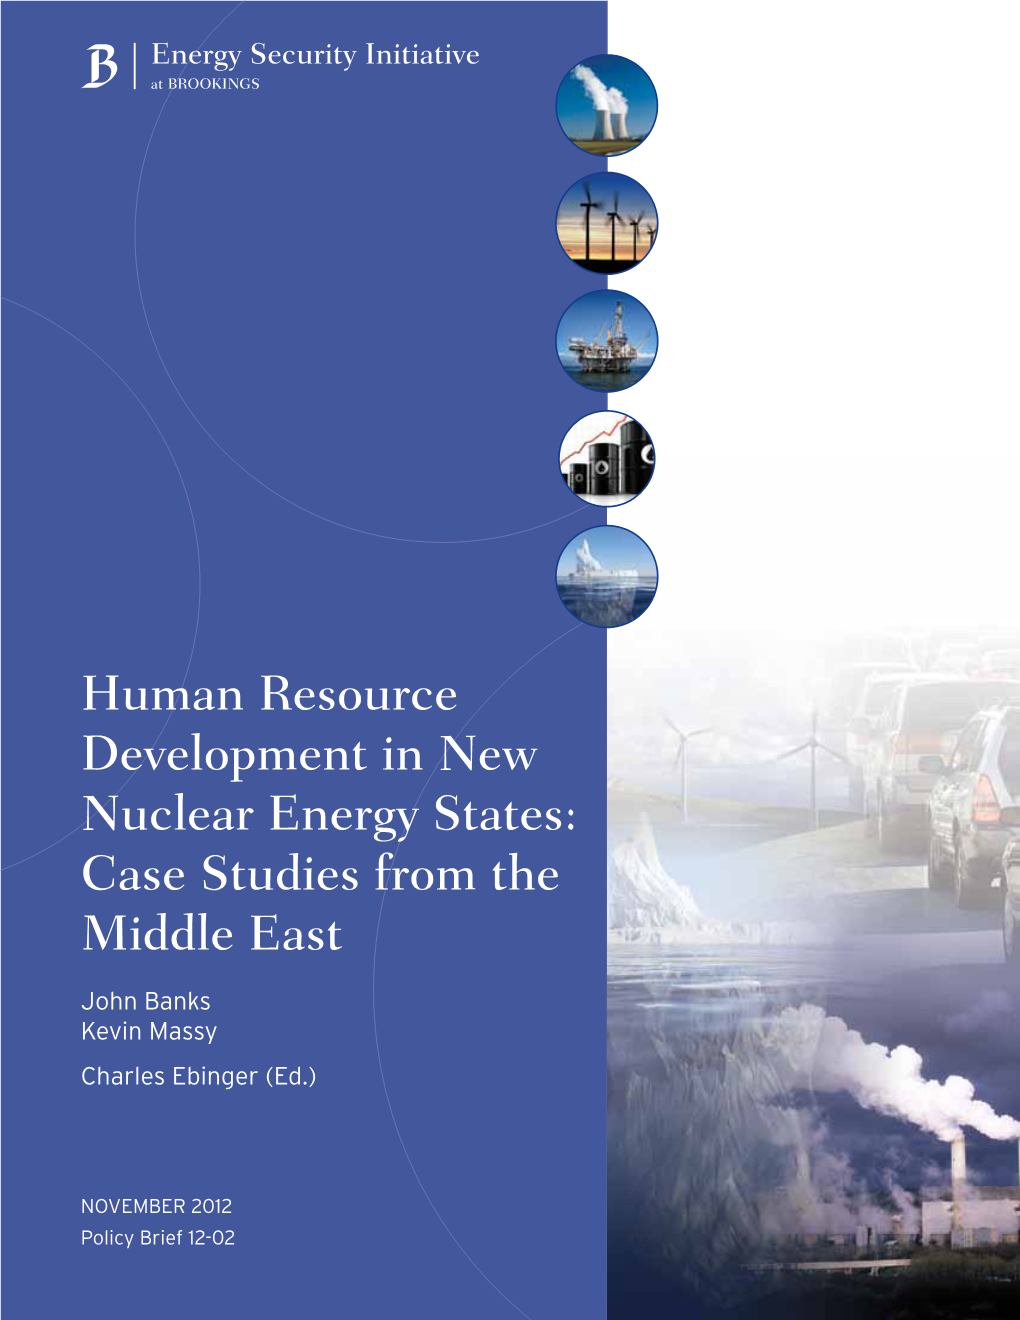 Human Resource Development in New Nuclear Energy States: Case Studies from the Middle East